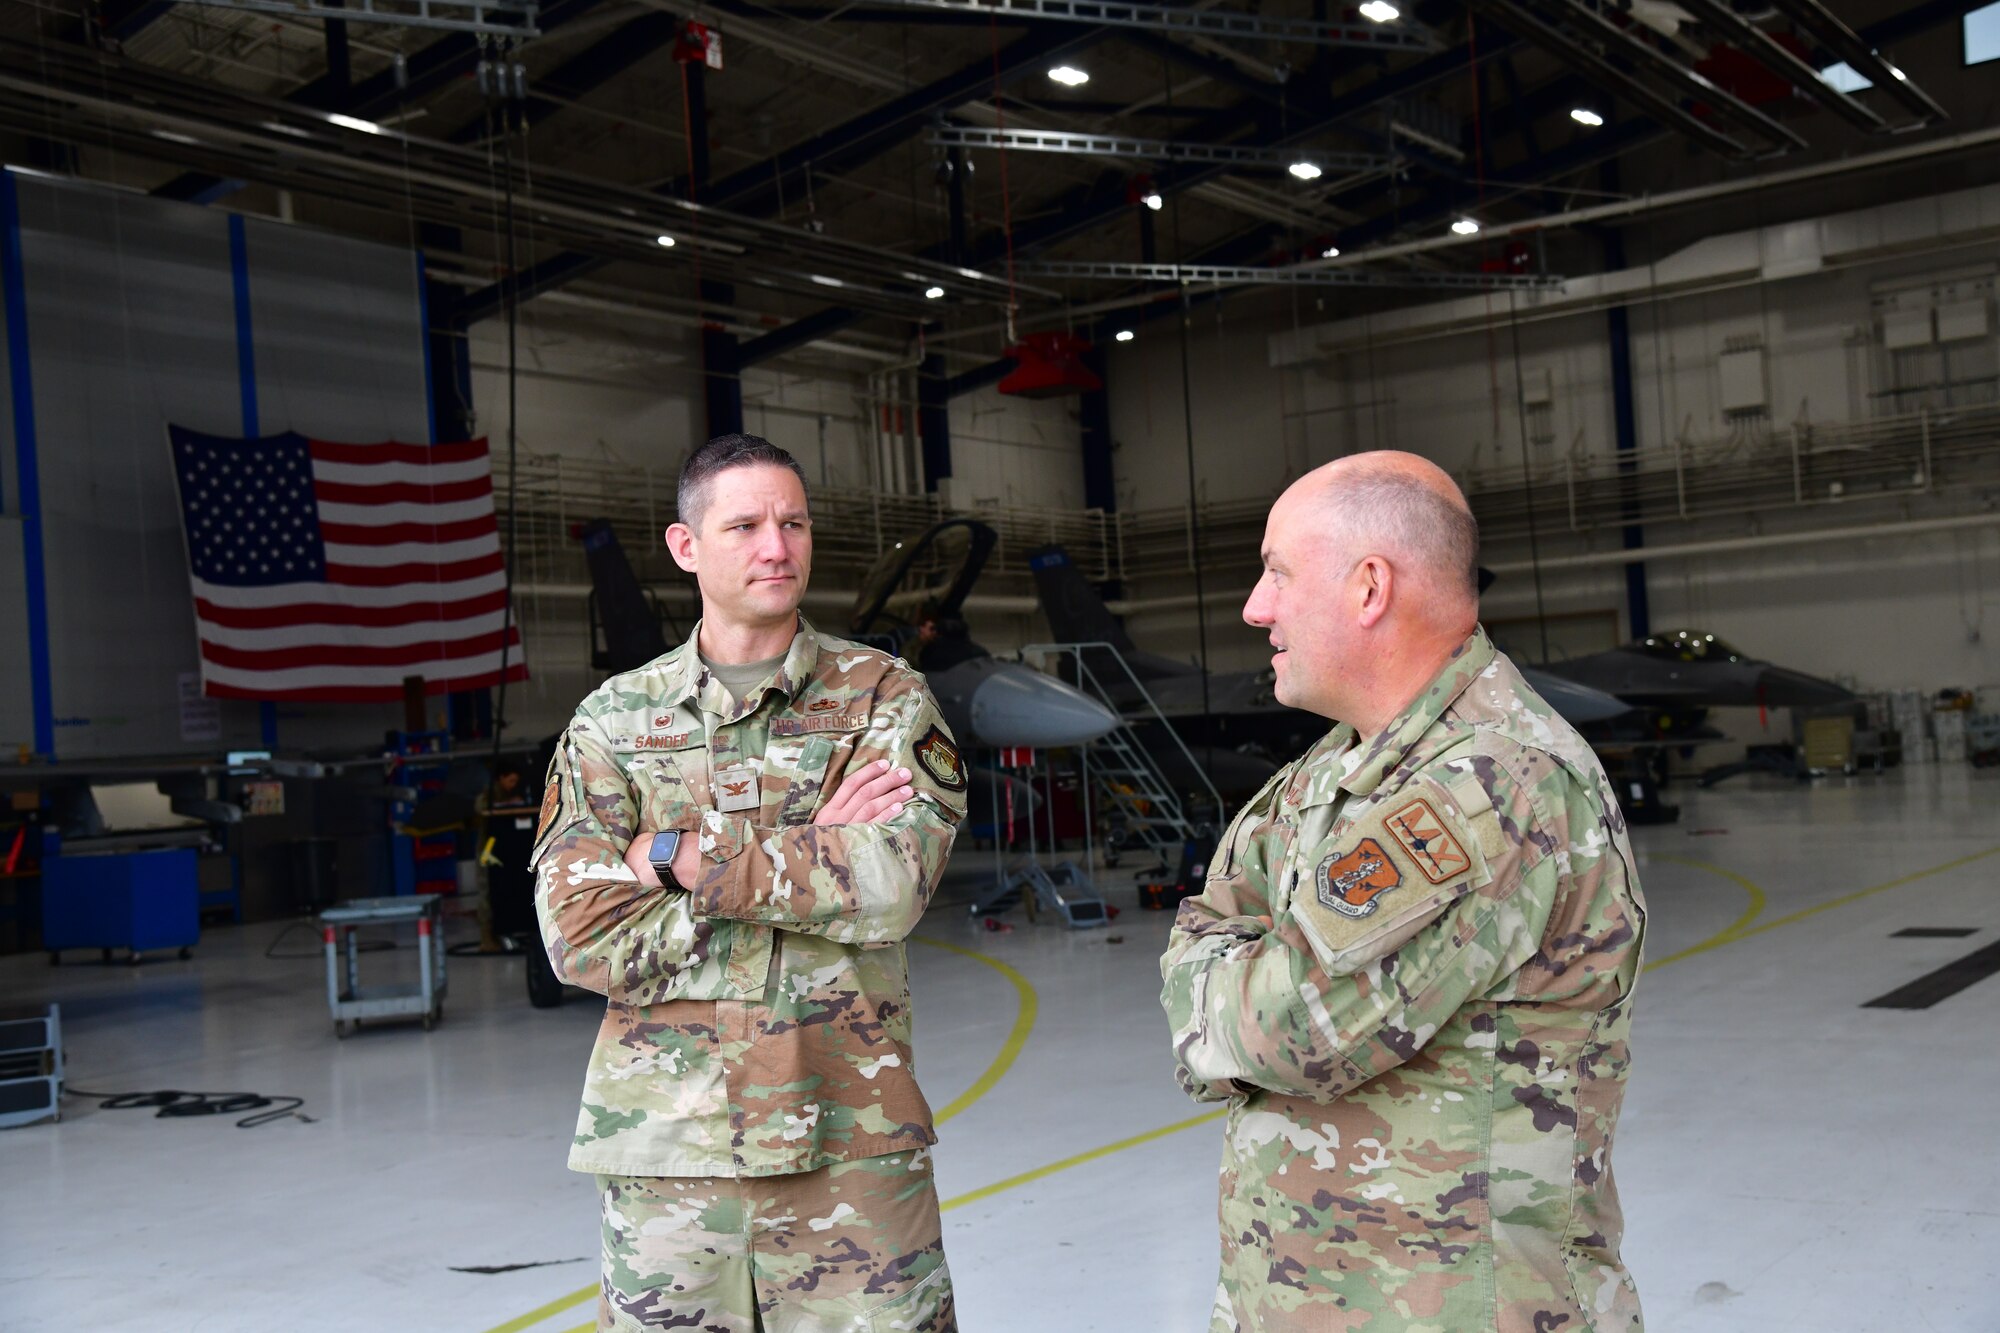 Production Assessment Team Consultant and 152nd Maintenance Group Commander, Col. Jason Sander cross talks with 148th Aircraft Maintenance Squadron Commander, Lt. Col. Ryan Blazevic during an Air National Guard Production Assessment Team site visit at the 148th Fighter Wing September 12-15, 2022.